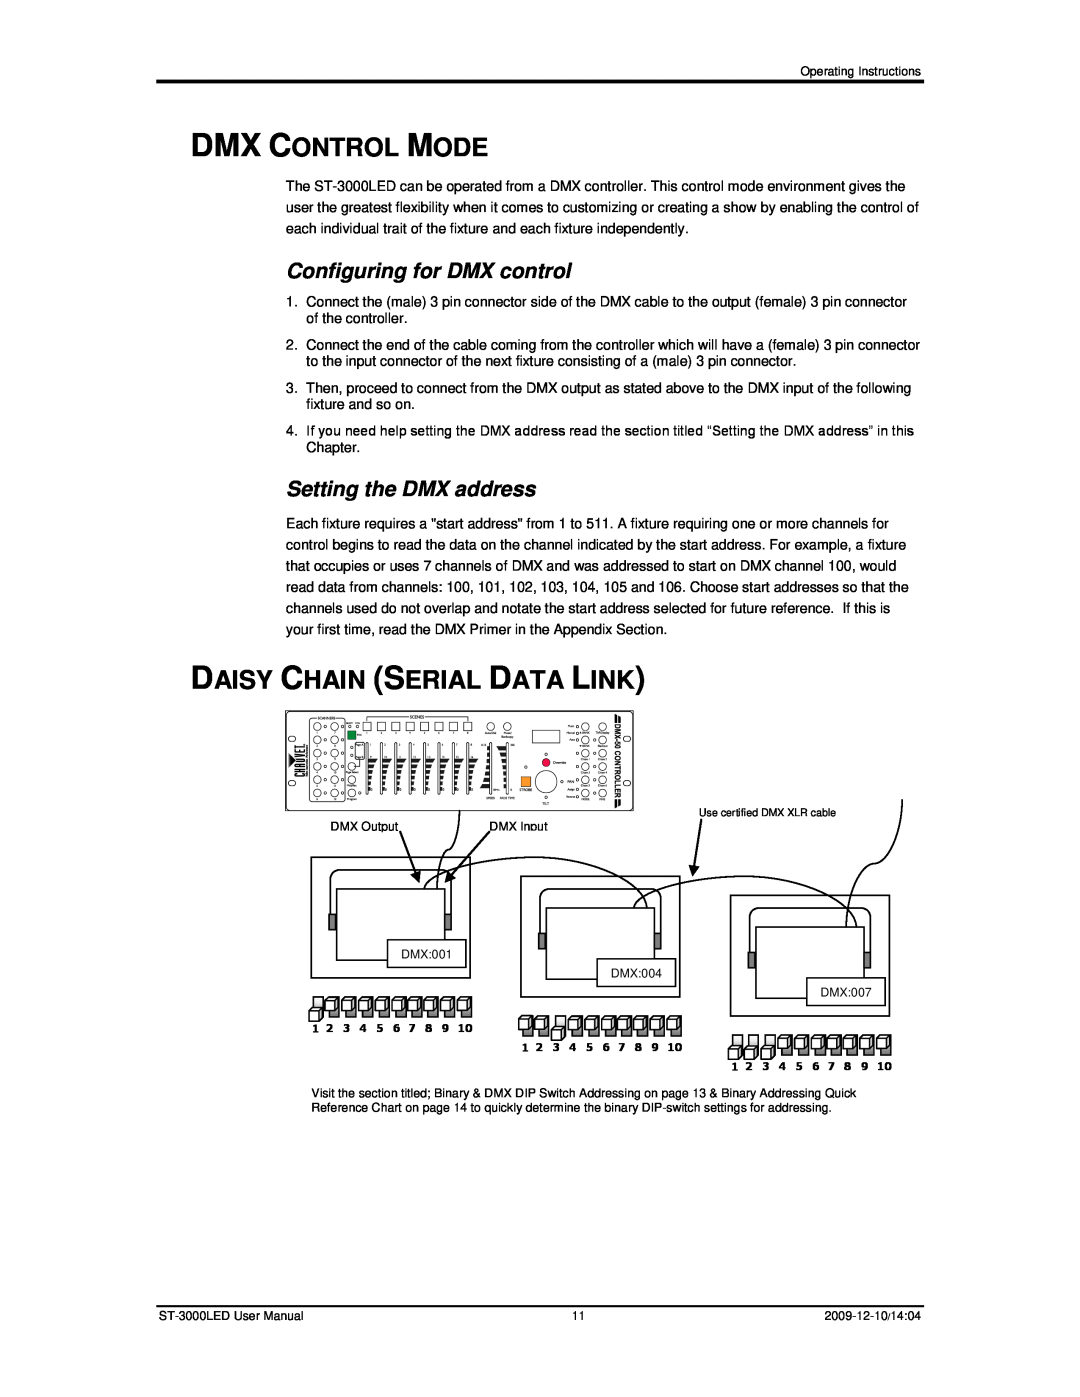 Chauvet ST-3000LED Dmx Control Mode, Daisy Chain Serial Data Link, Configuring for DMX control, Setting the DMX address 